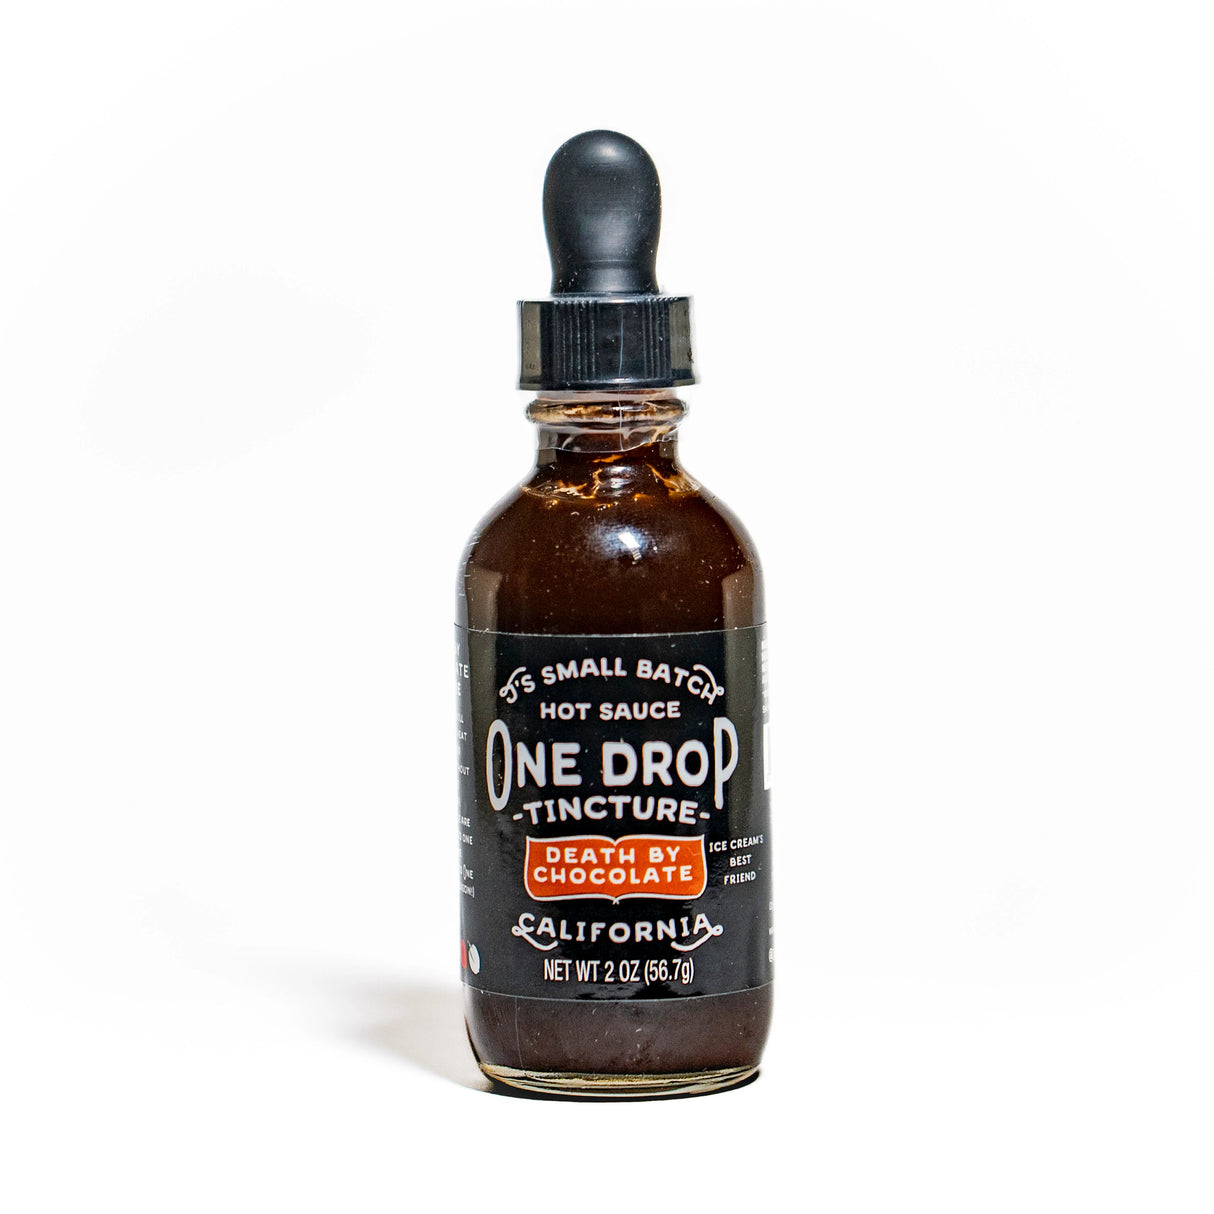 J's Small Batch - Death by Chocolate - One Drop Tincture